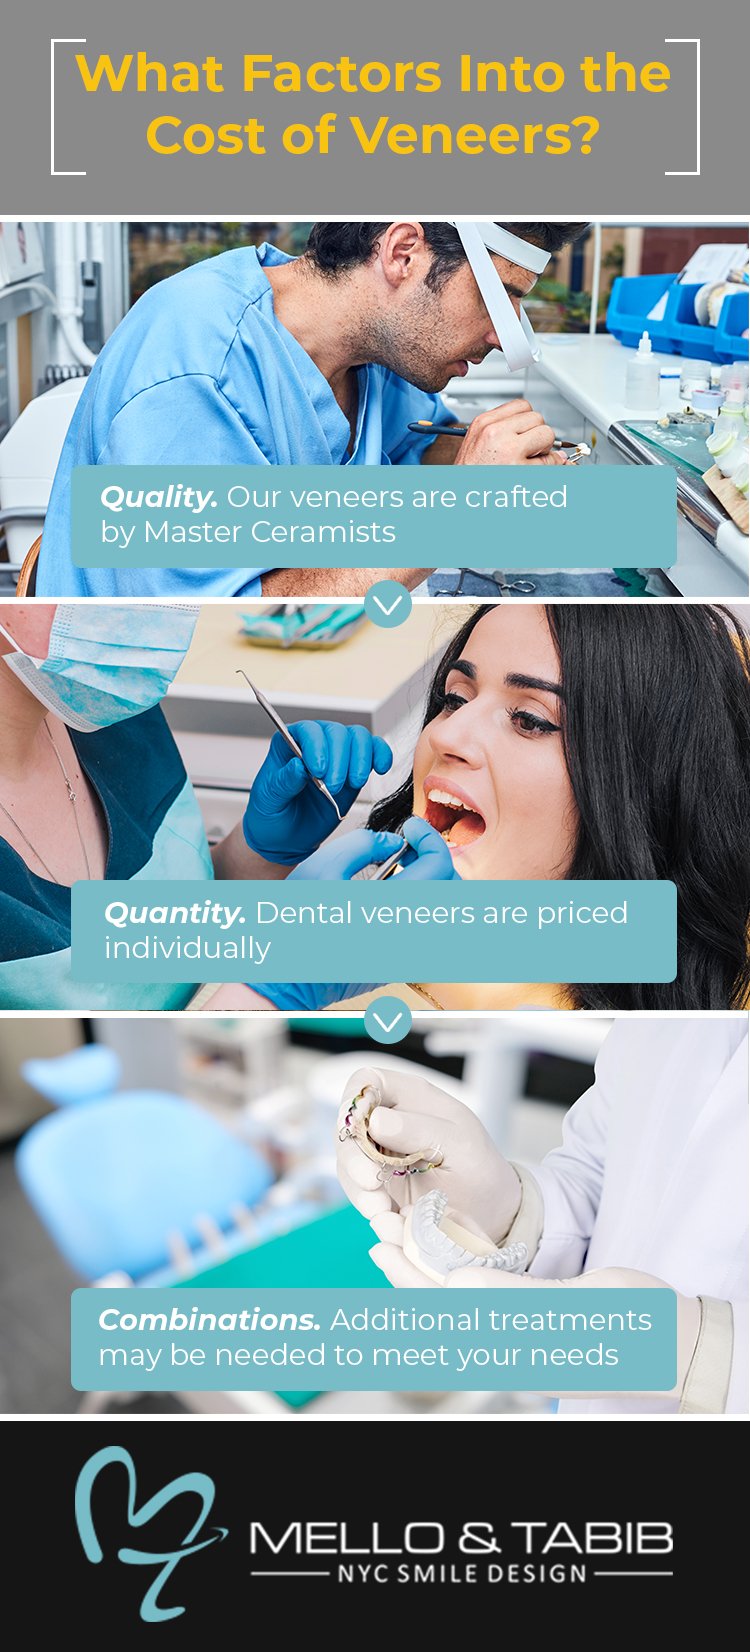 What Factors into the Cost of Dental Veneers Infographic